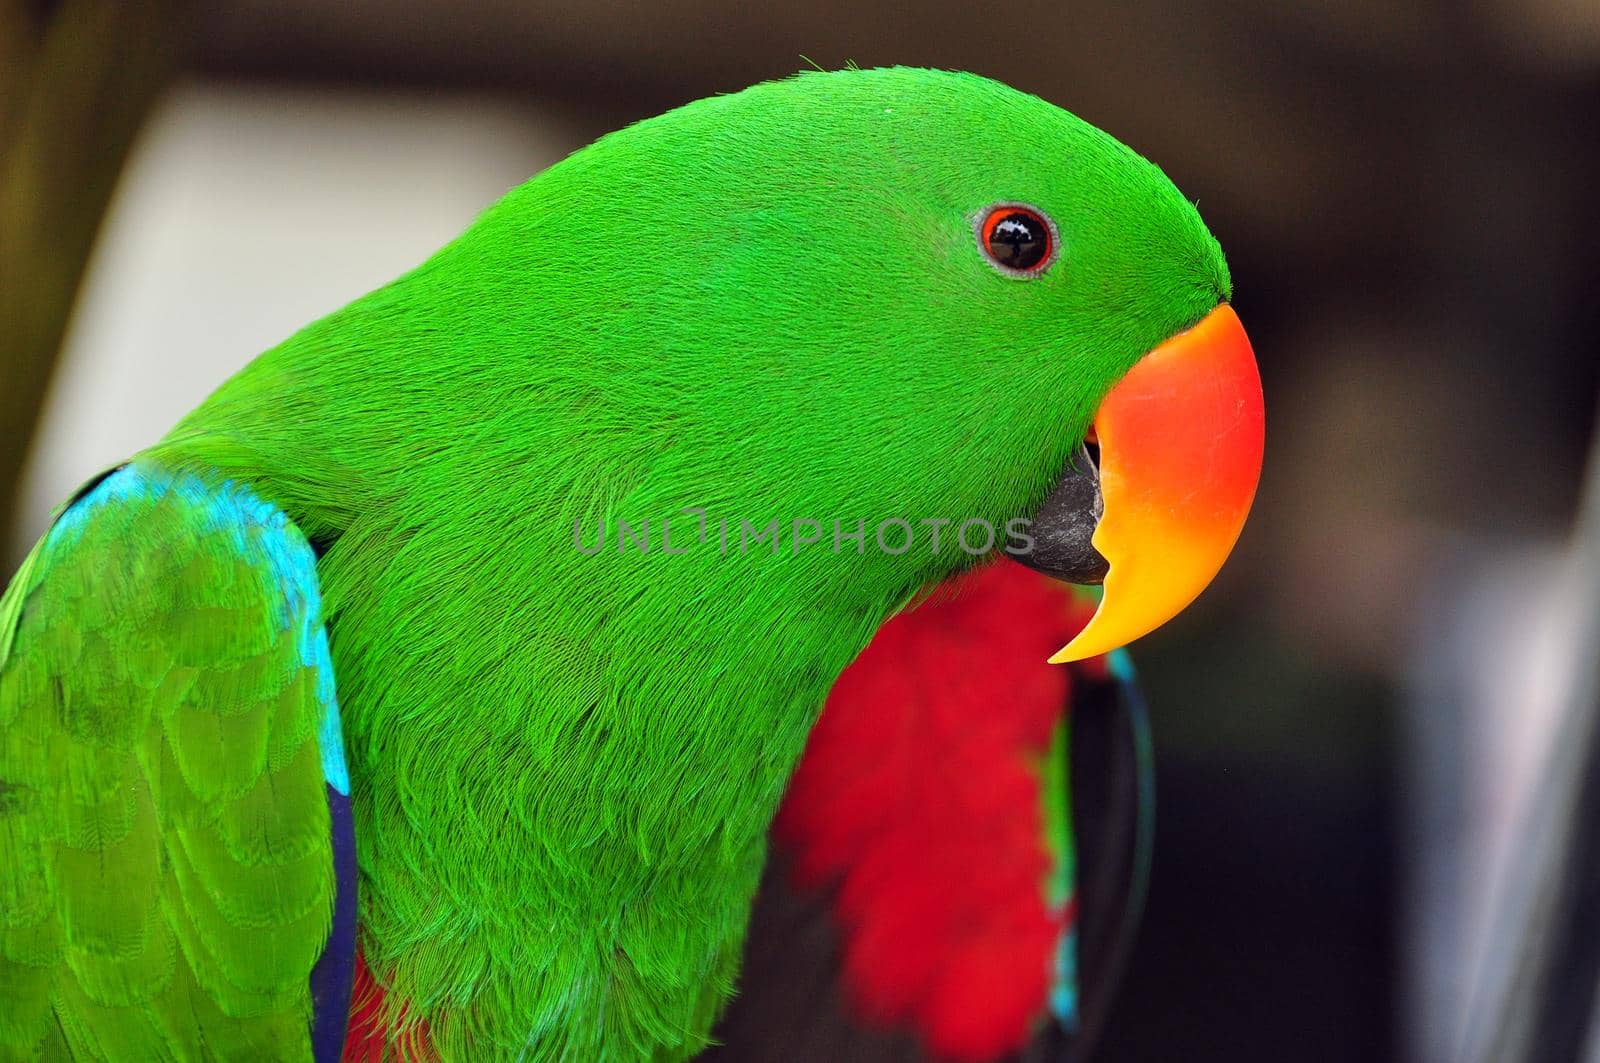 Green-headed Eclectus parrot, Closeup of vivid green-colored Eclectus parrot with bright beak